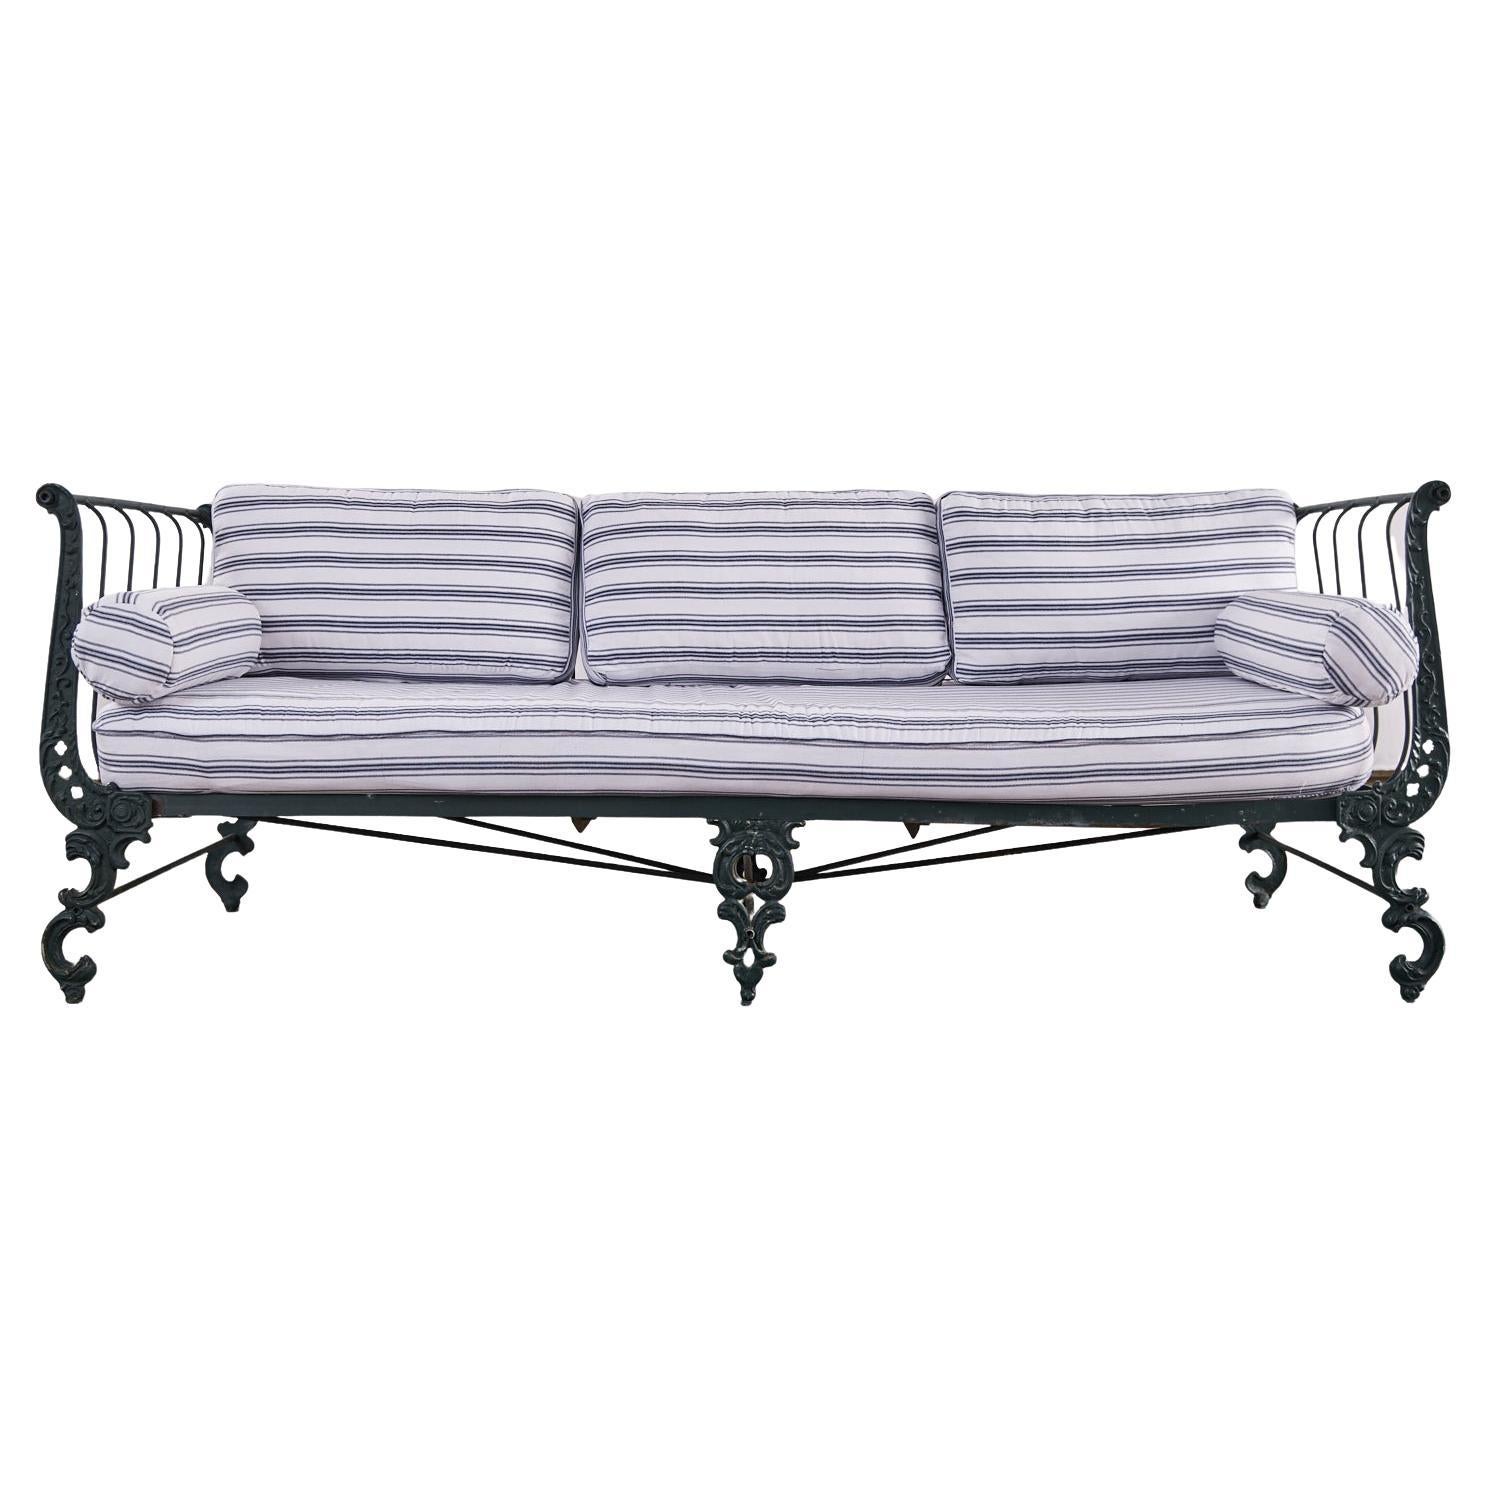 English Victorian Style Painted Iron Daybed Settee